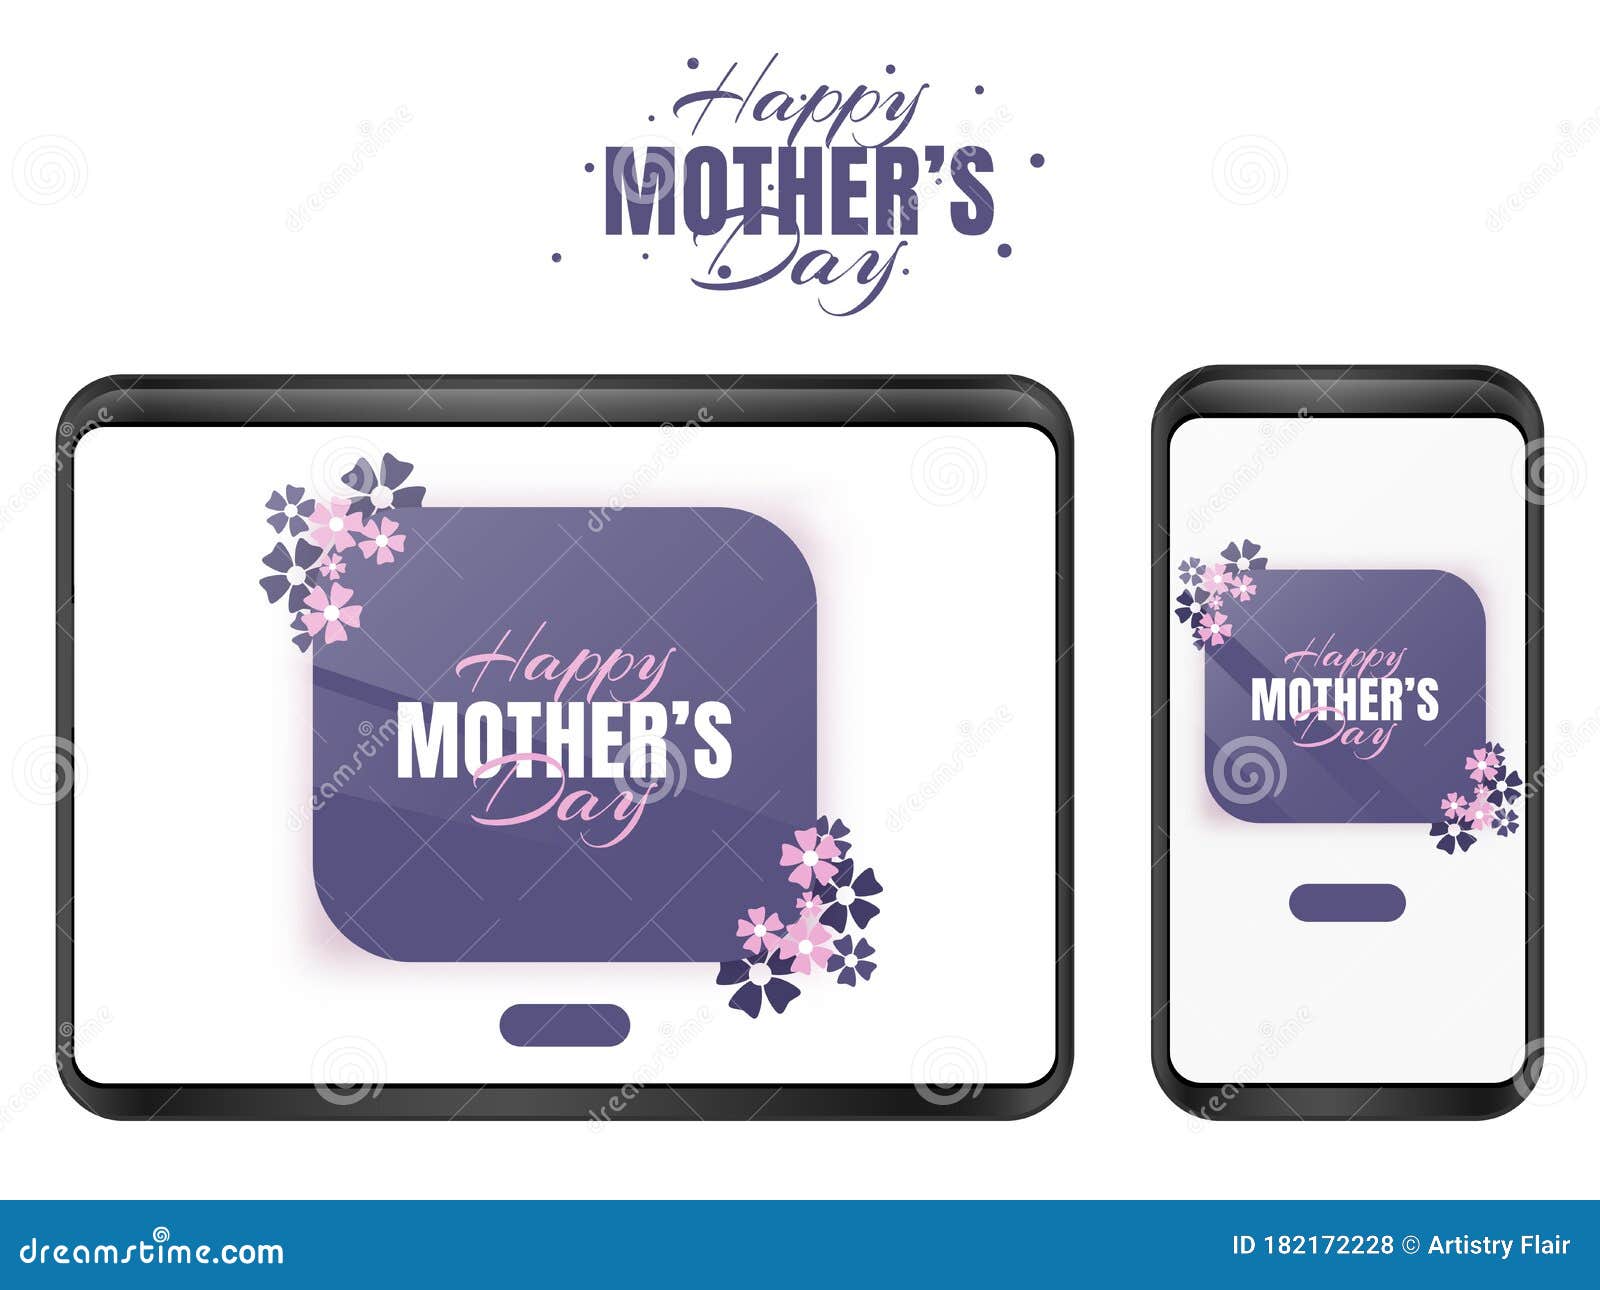 Happy Mother S Day Mobile Wallpaper Screen Or Pc And Laptop Wallpaper Or Web Design Concept On Mother S Day With Beautiful Stock Vector Illustration Of Elegance Female